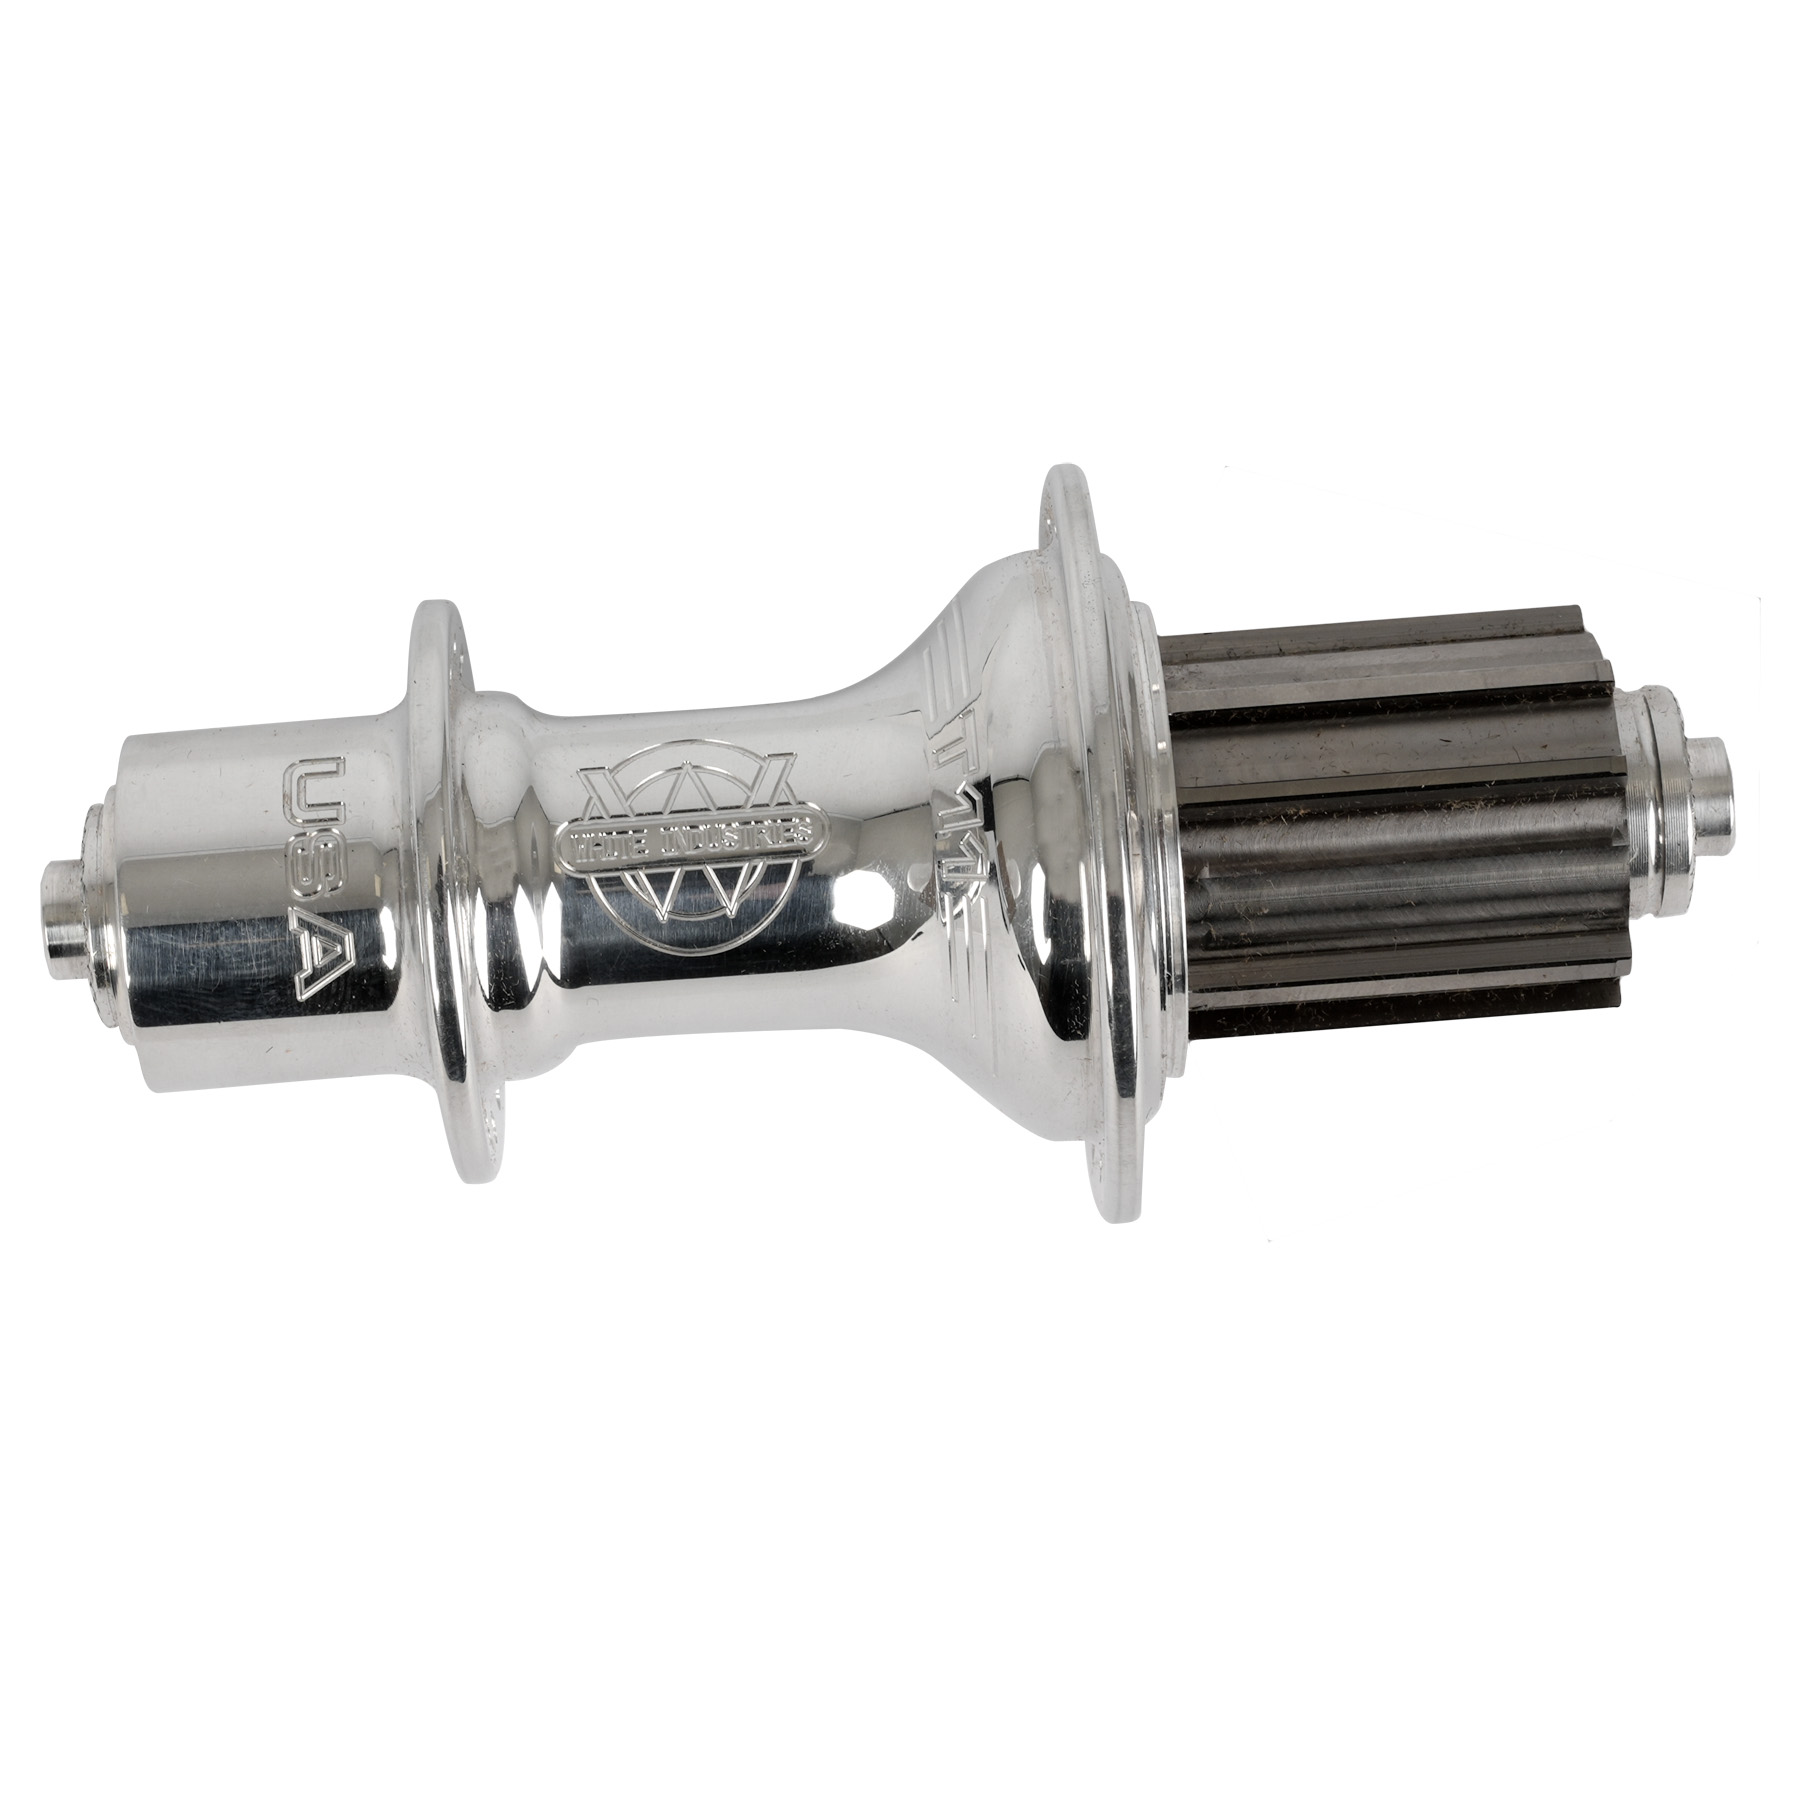 Productfoto van White Industries T11 Achterwielnaaf | QR 10x130mm | Campagnolo Freehub - silver